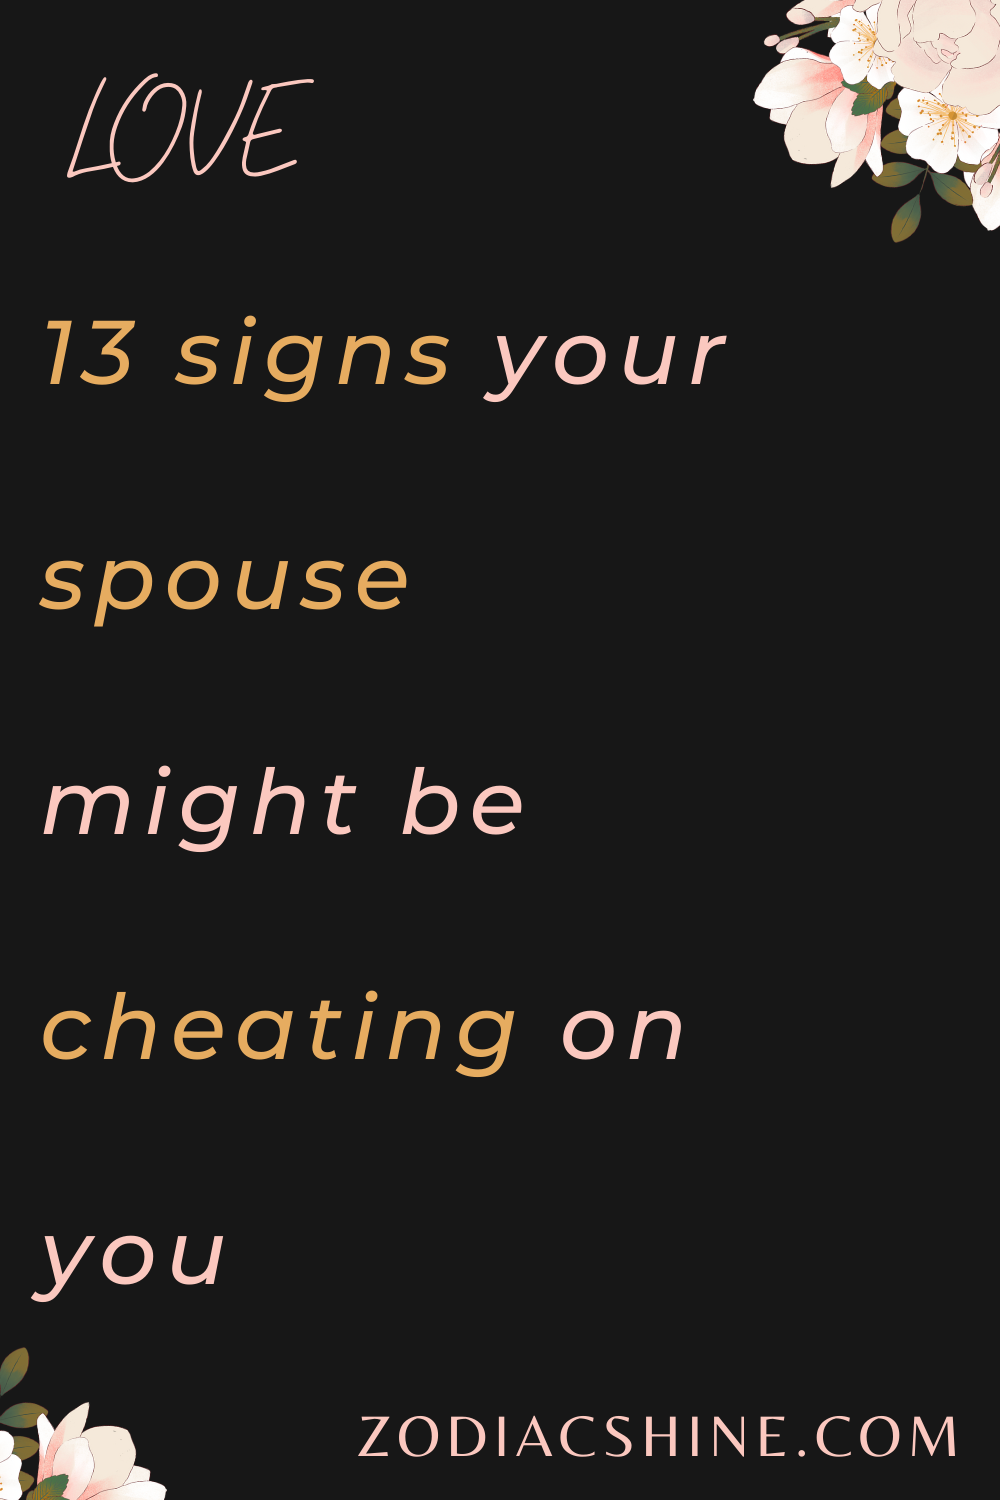 13 signs your spouse might be cheating on you